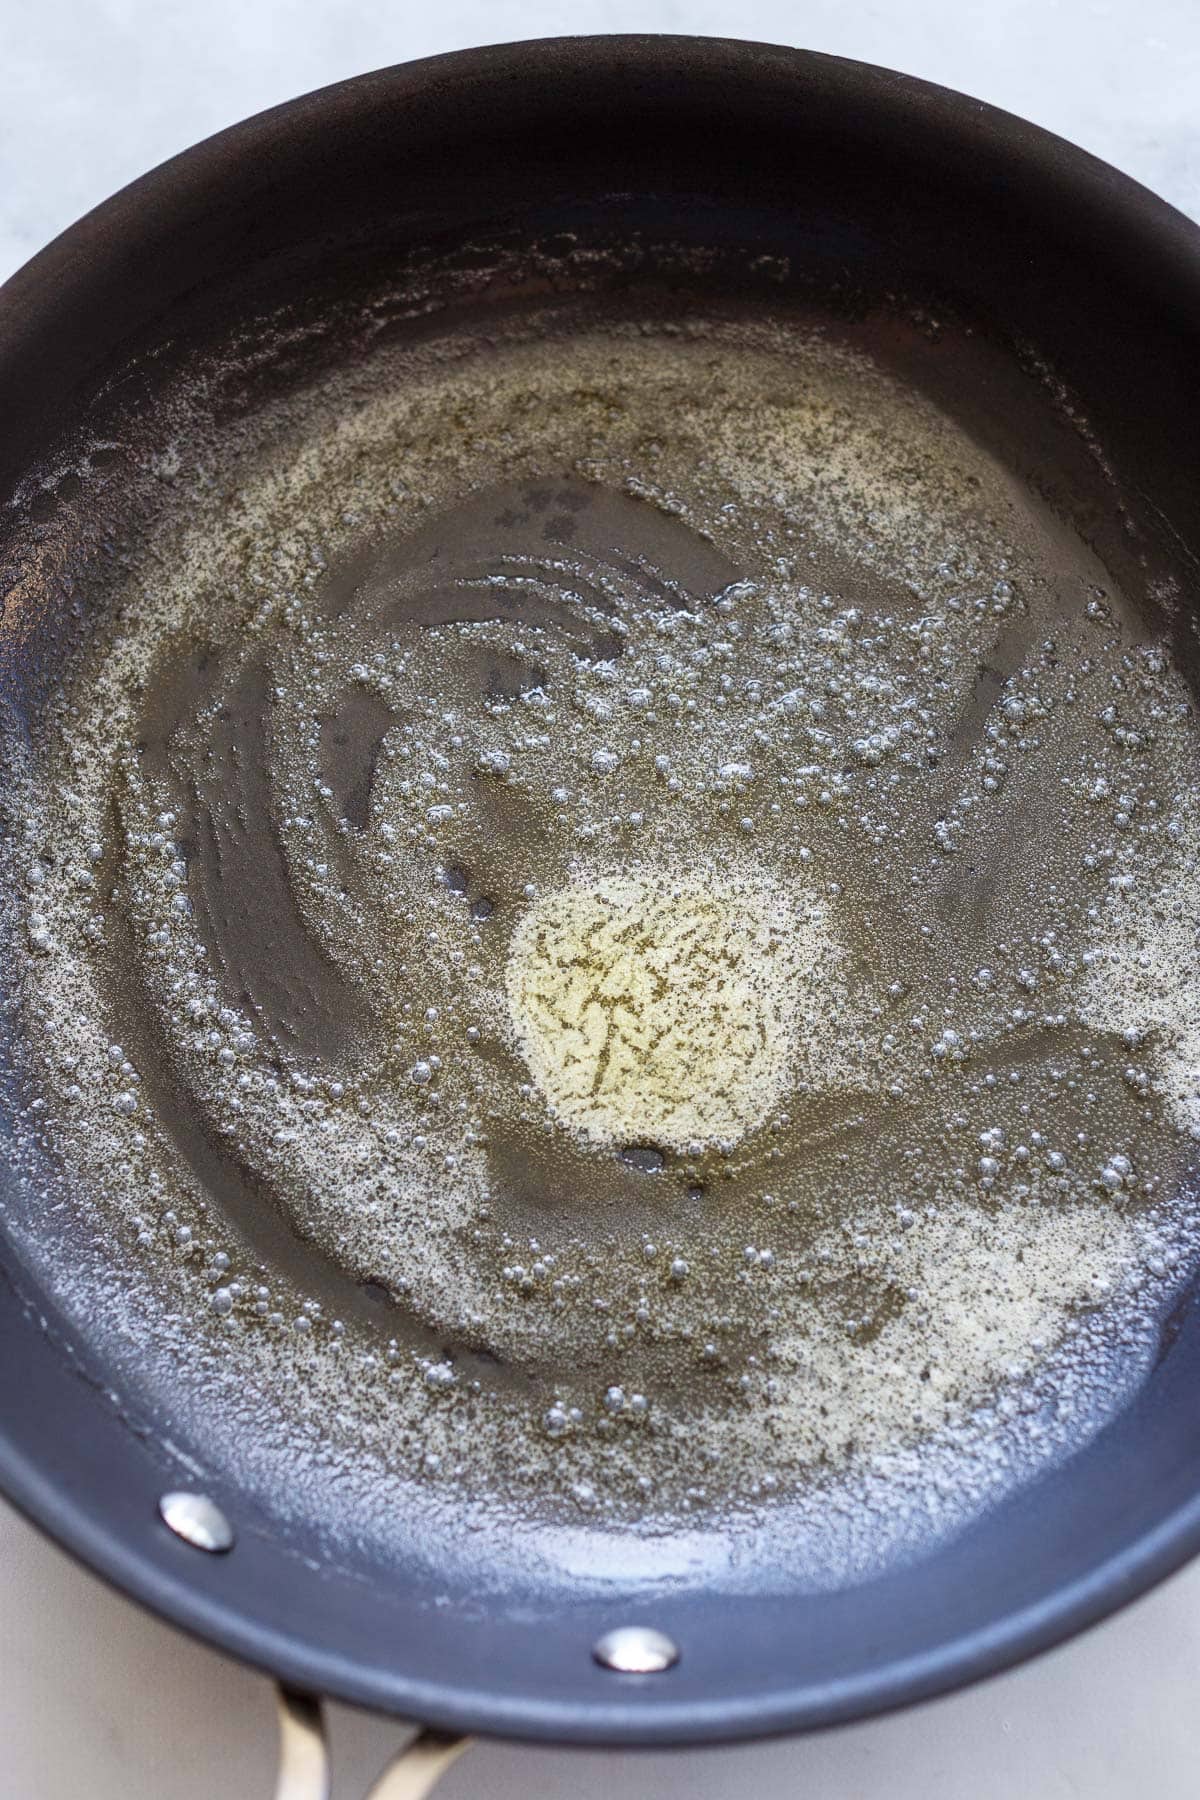 butter melted and spread out in skillet.